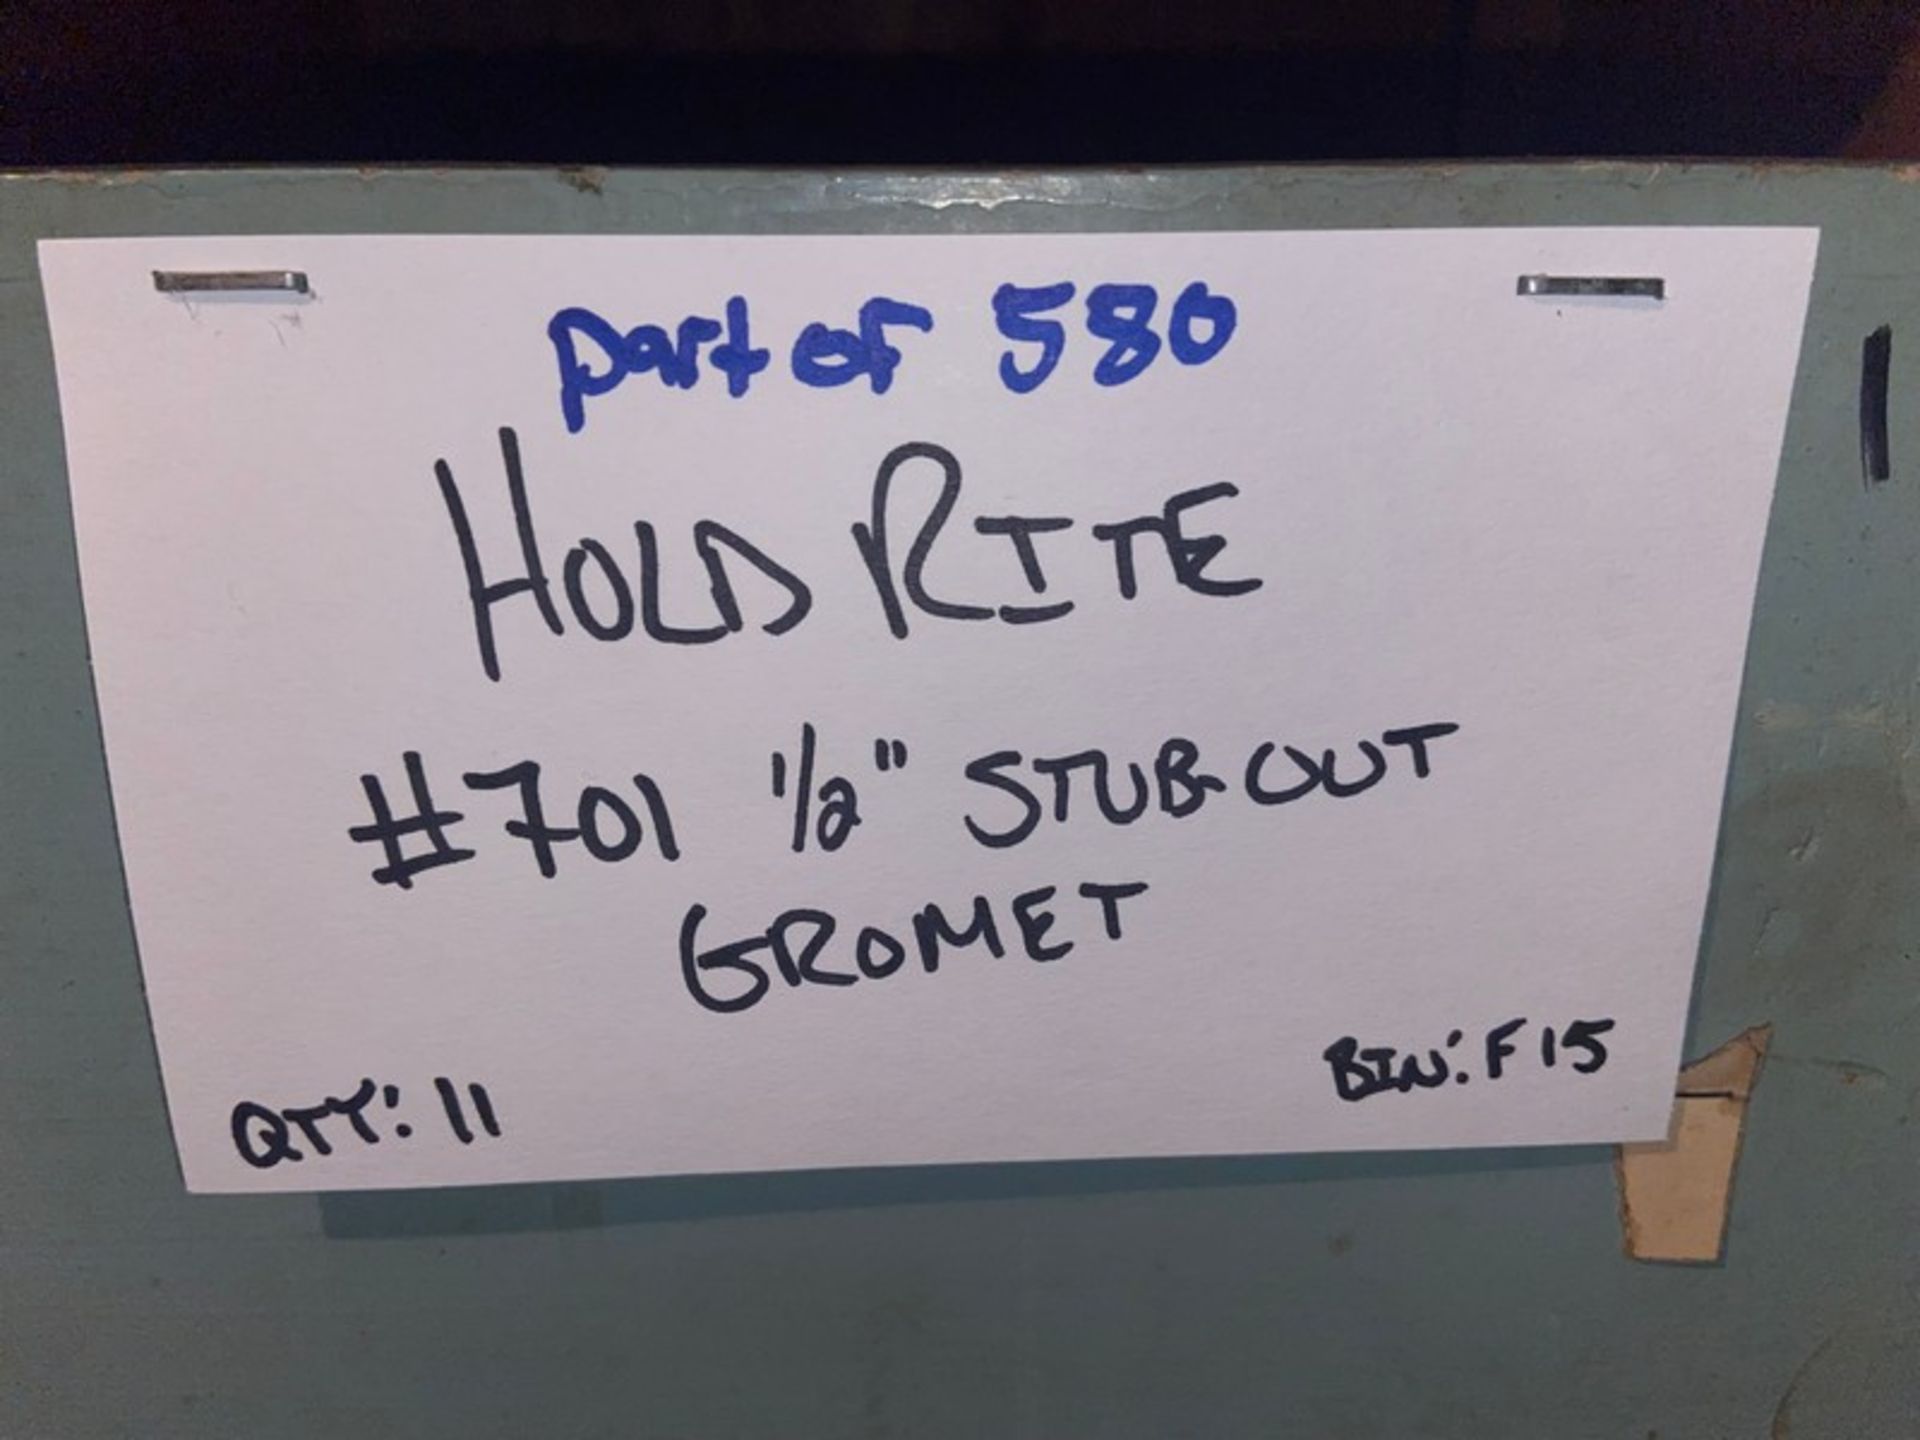 (99) HOLD RITE #704 1/2” PEX 90’ (Bin:F14), Includes (11)HOLD RITE #701 1/2” Stub-out Gromet (Bin: - Image 8 of 8